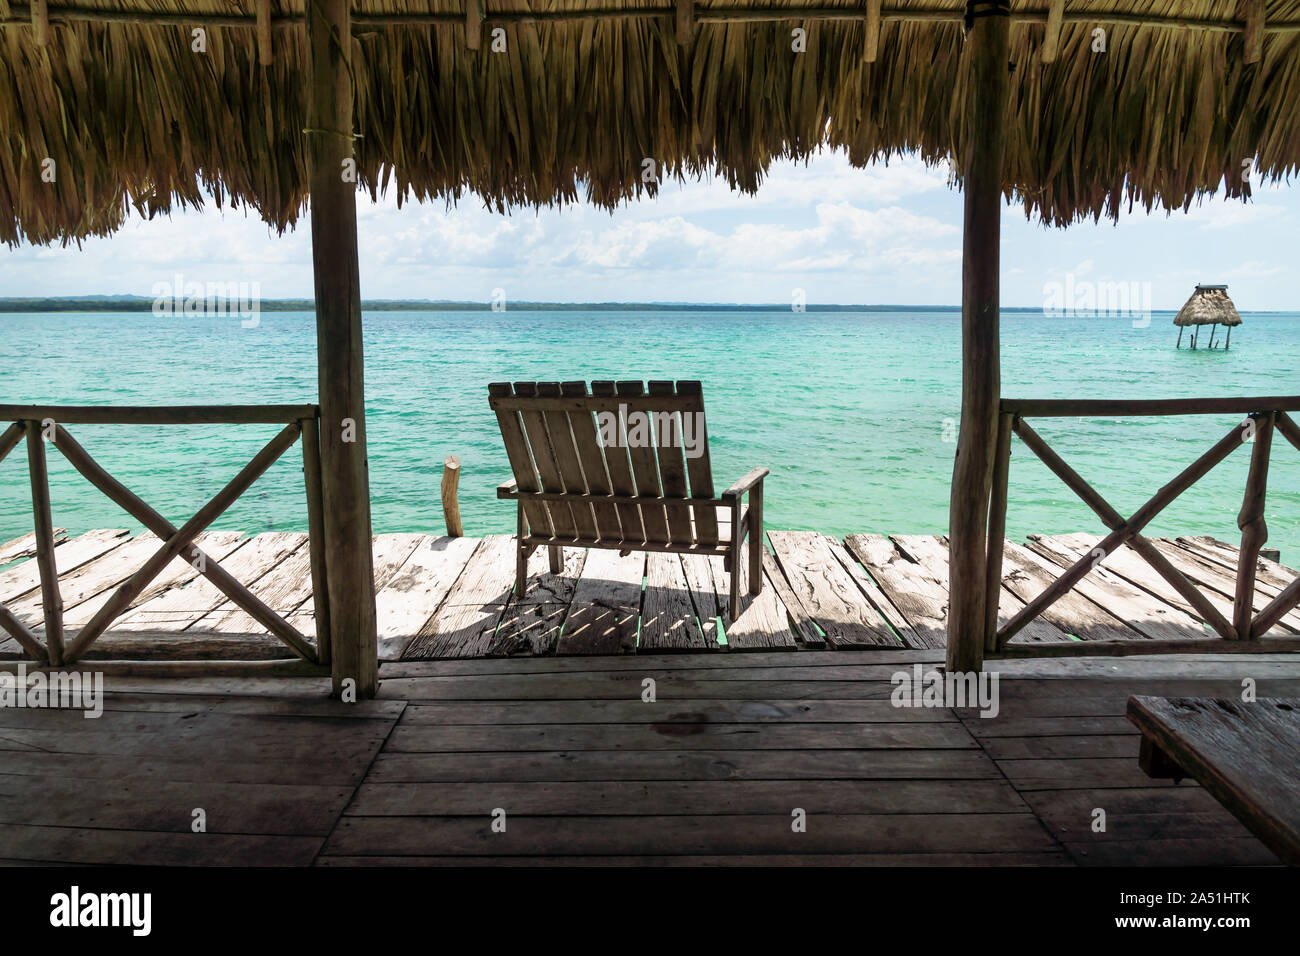 Dock with chair with view on lake Itza, El Remate, Guatemala Stock Photo